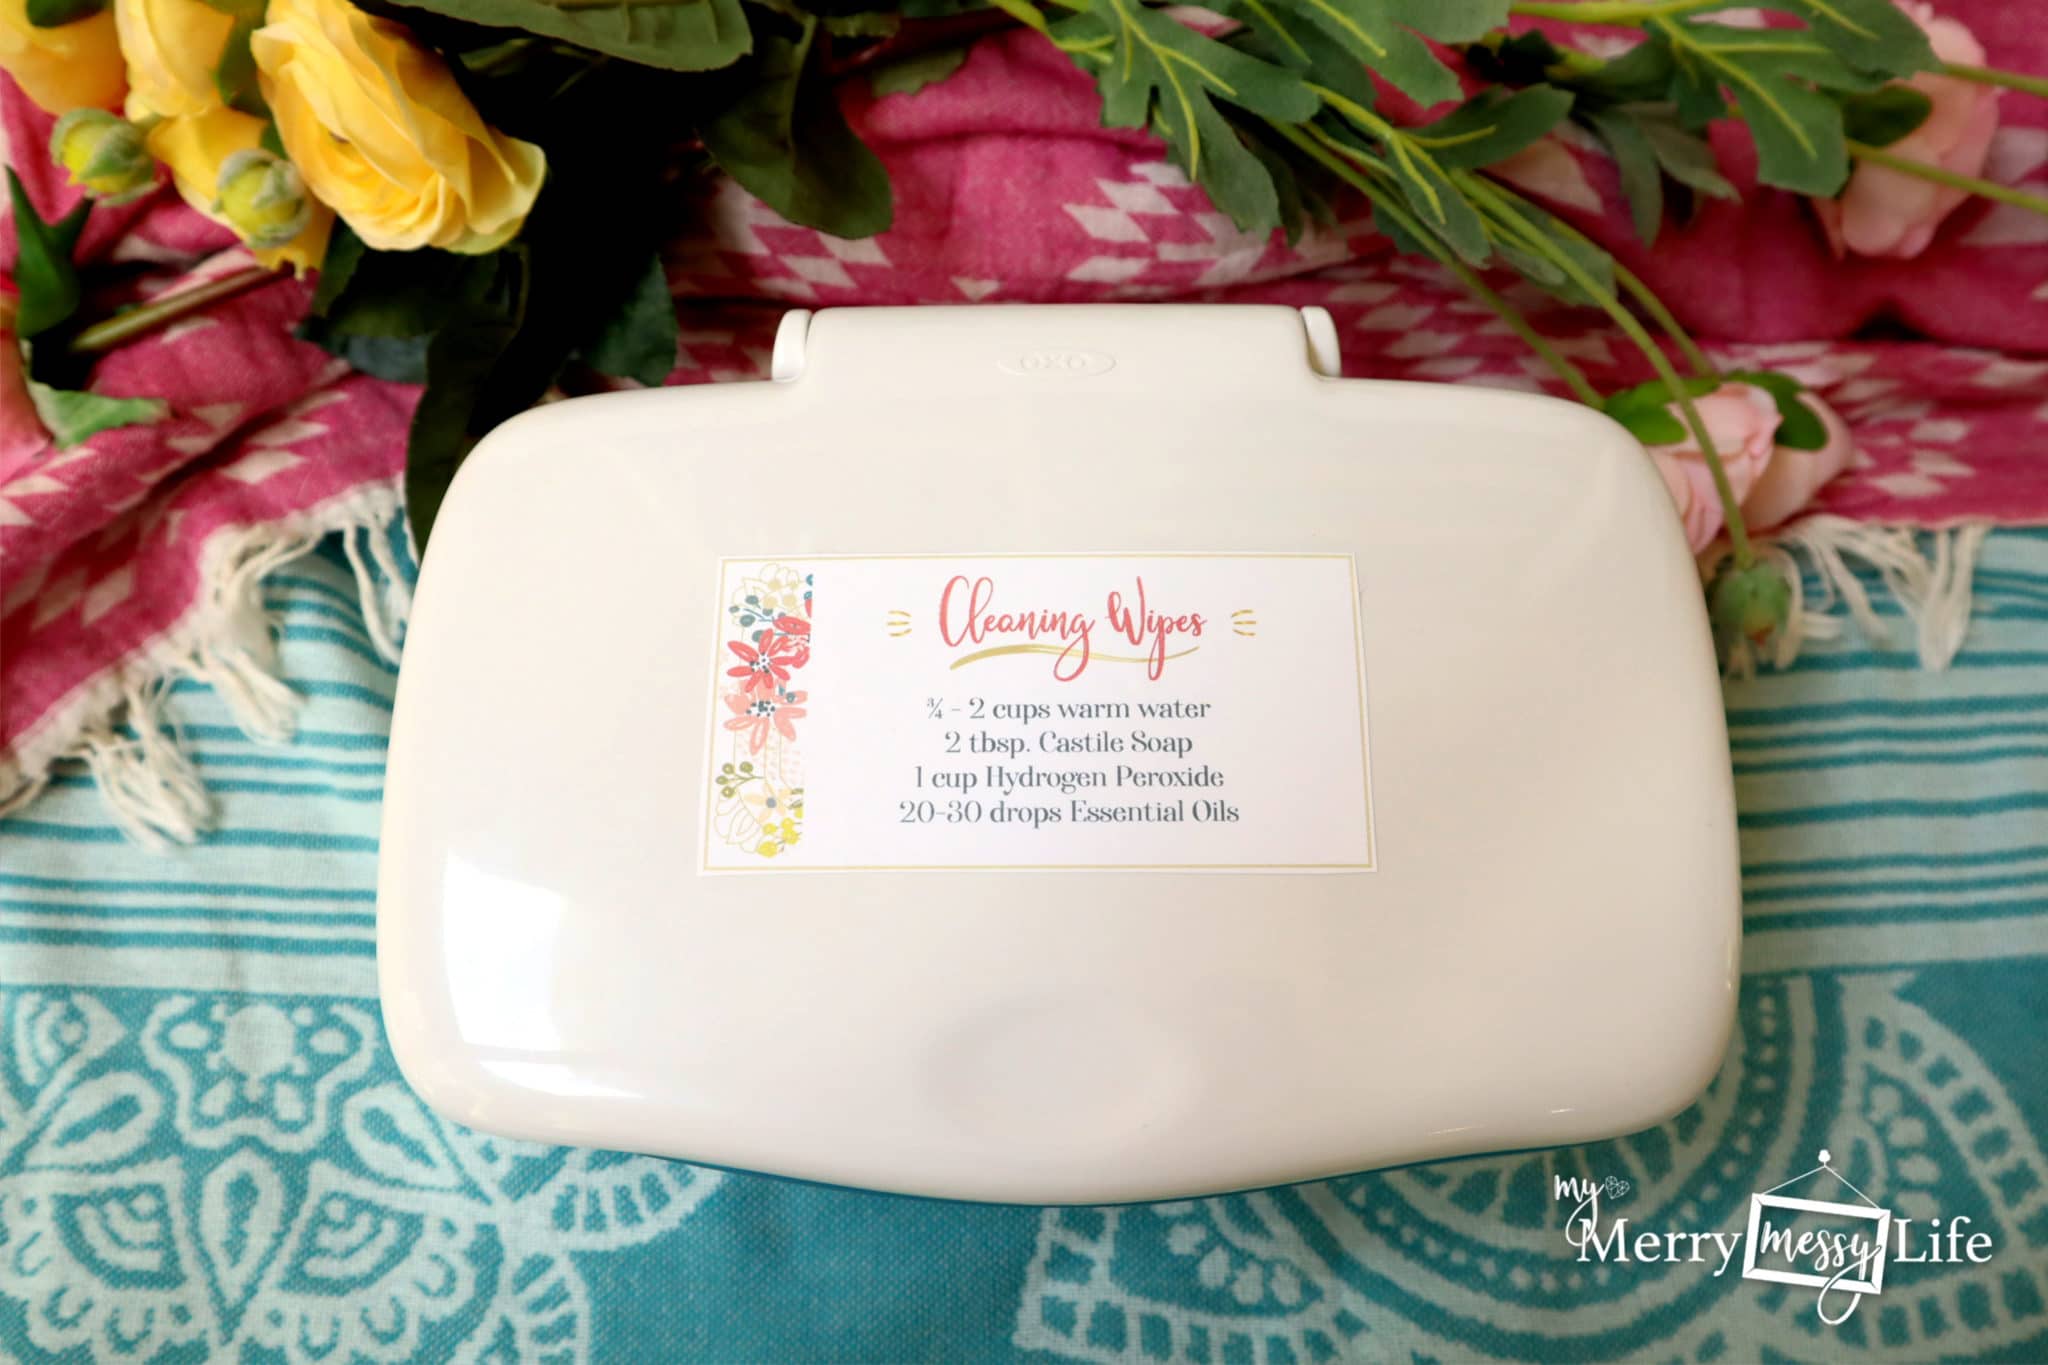 DIY Natural Reusable Cleaning Wipes Recipe with Castile Soap, Hydrogen Peroxide and Essential Oils